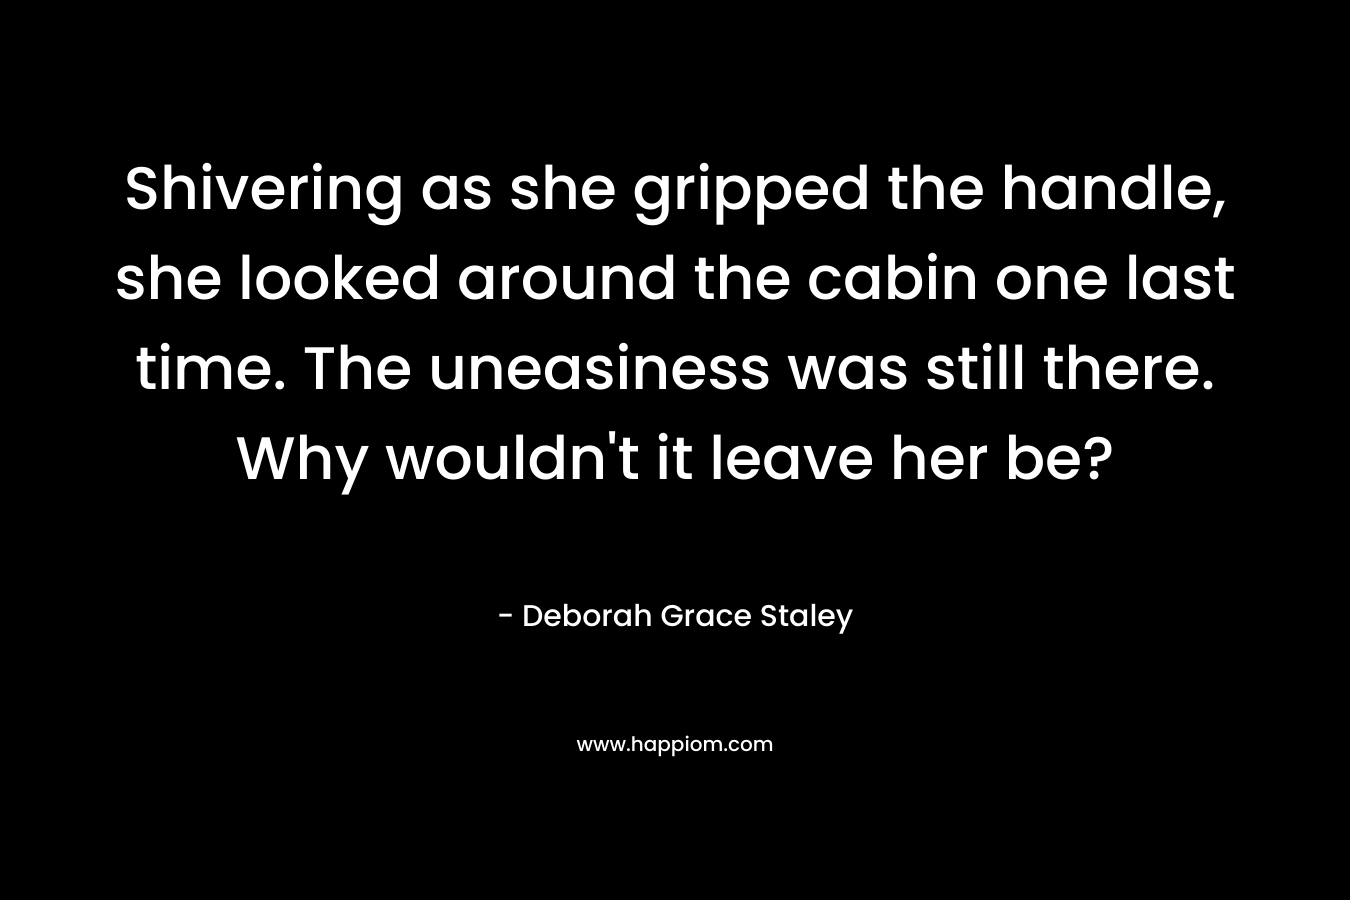 Shivering as she gripped the handle, she looked around the cabin one last time. The uneasiness was still there. Why wouldn't it leave her be?